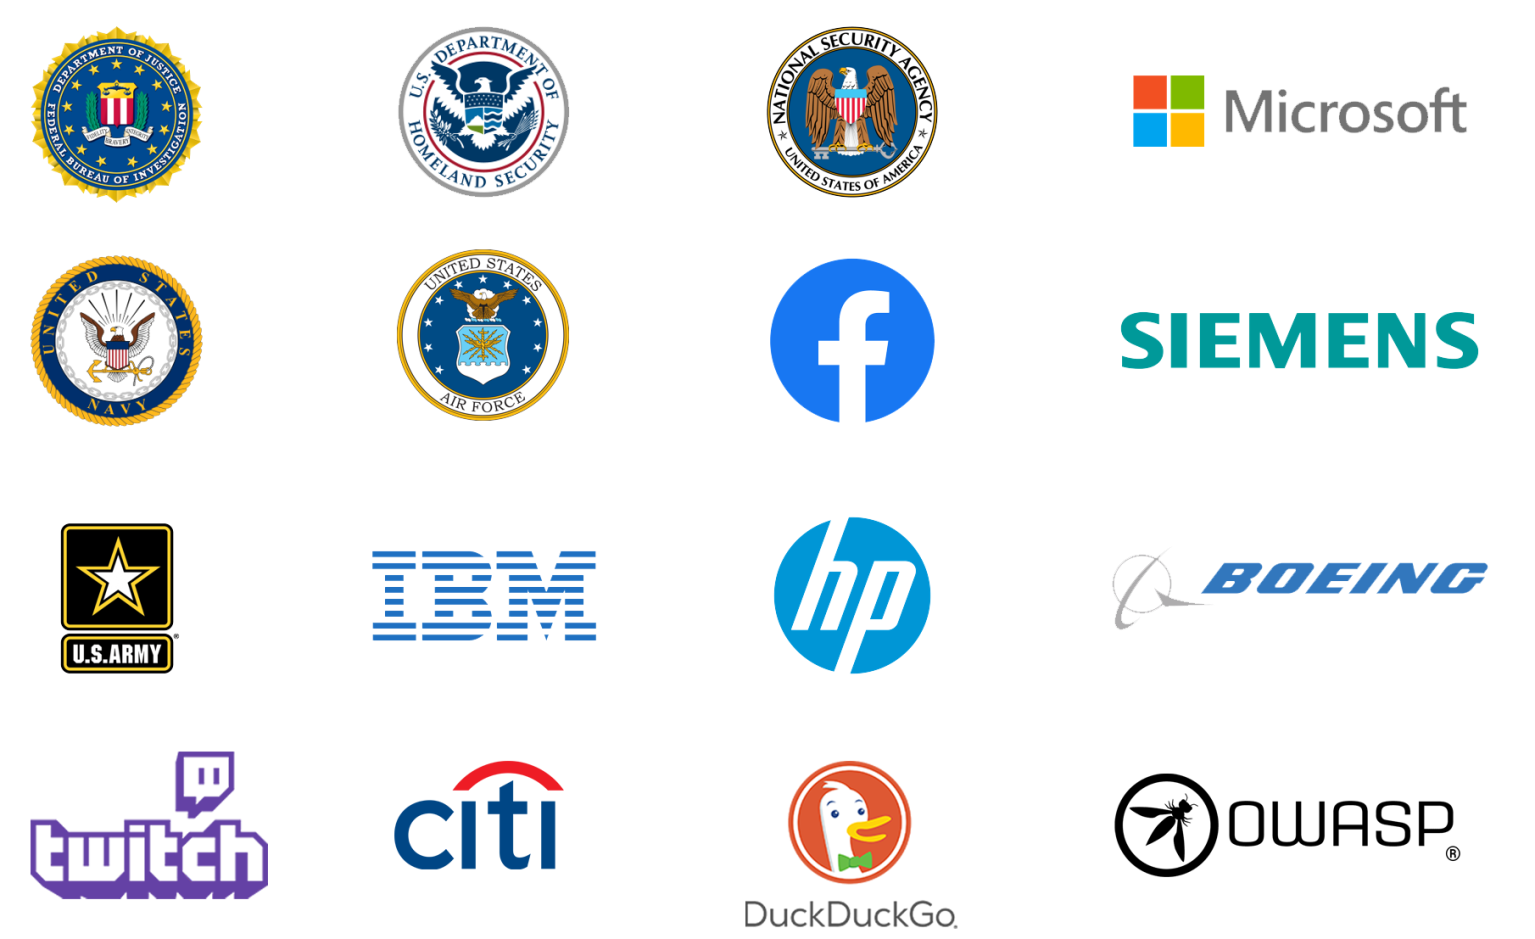 TCM Security Students Work at These Organizations